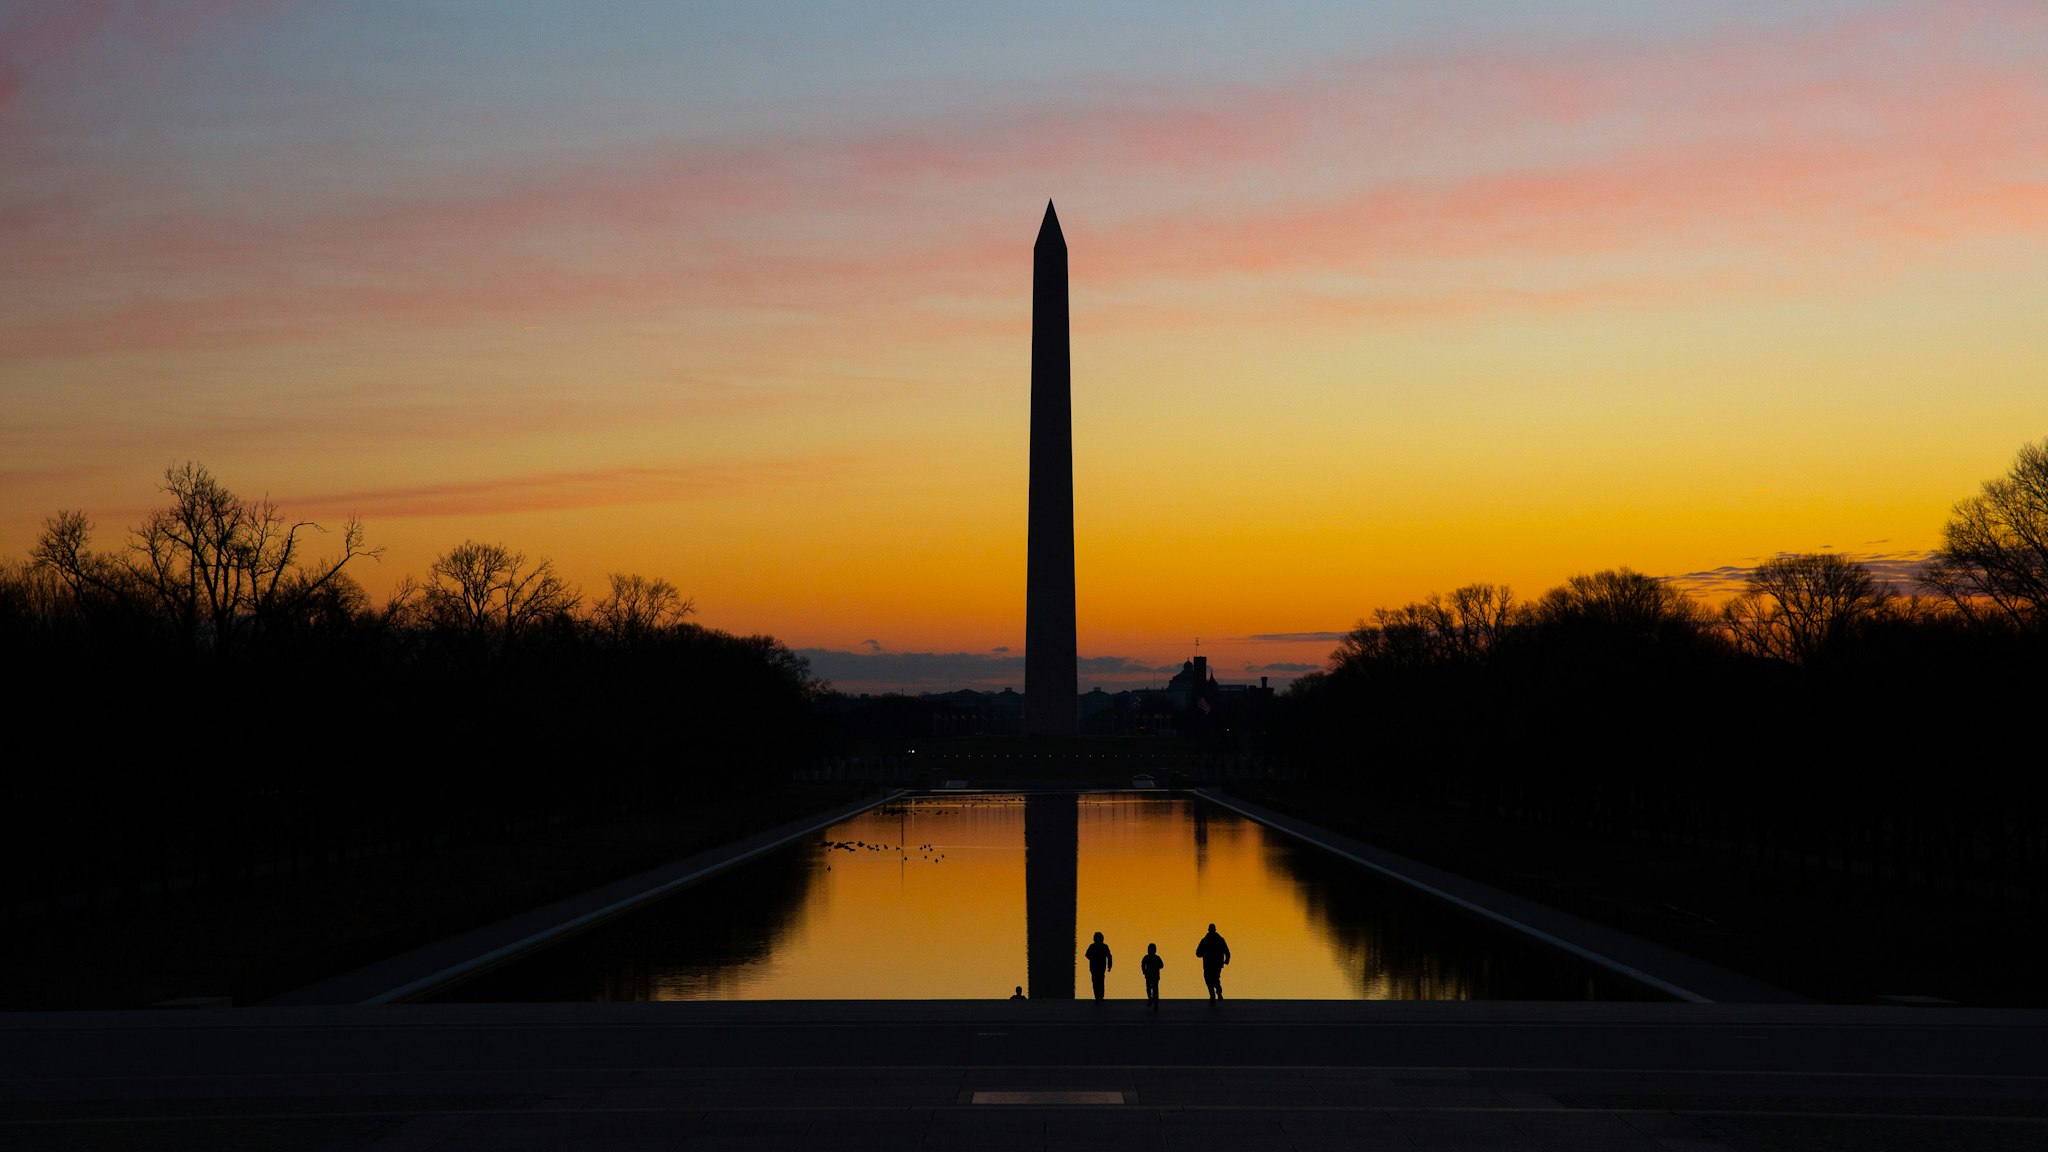 WASHINGTON, DC - JANUARY 25: Dawn breaks behind the Washington Monument as viewed from the Lincoln Memorial, Washington DC, on the day that the government shutdown was declared over by President Trump. 25 January 2019. PHOTOGRAPH BY Adam Gray / Barcroft Images (Photo credit should read Adam Gray / Barcroft Media via Getty Images)